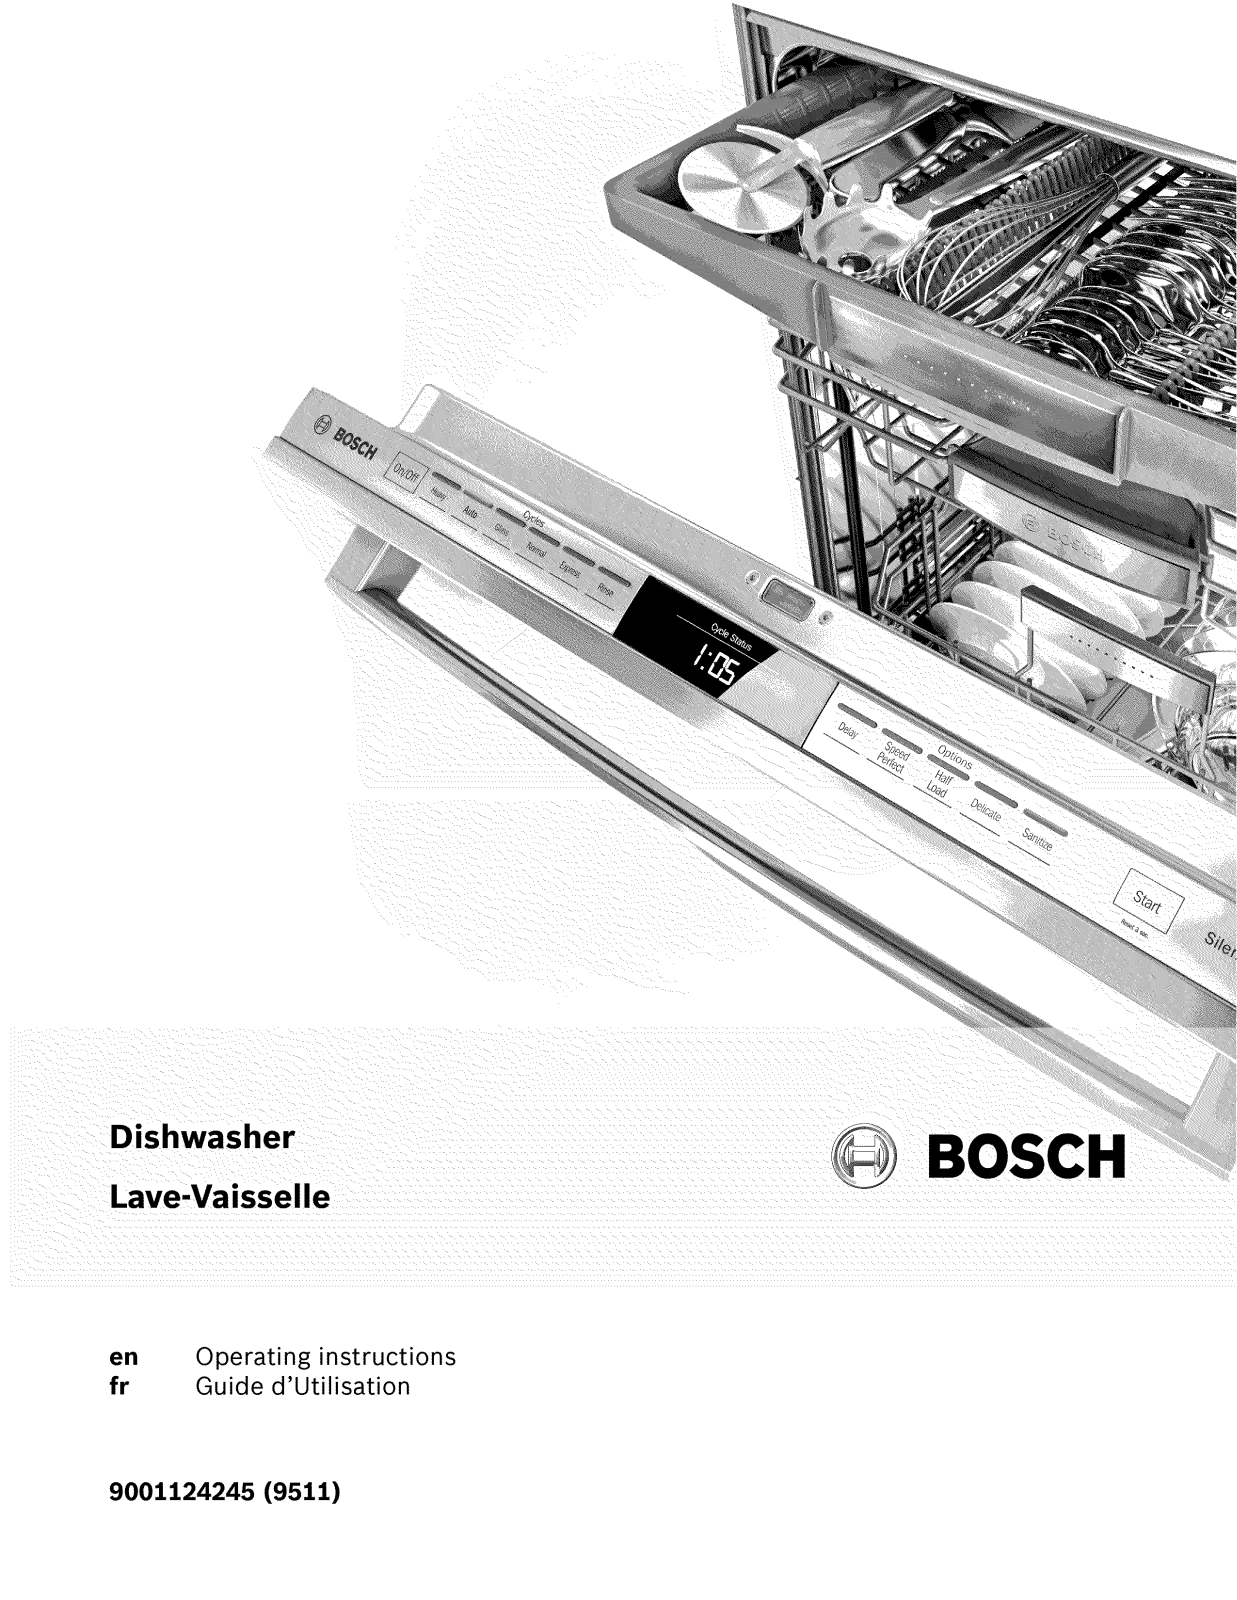 Bosch SHE3AR75UC/22, SHE3ARF6UC/22, SHX3AR75UC/22, SHX3AR72UC/22, SHE3ARF5UC/22 Owner’s Manual